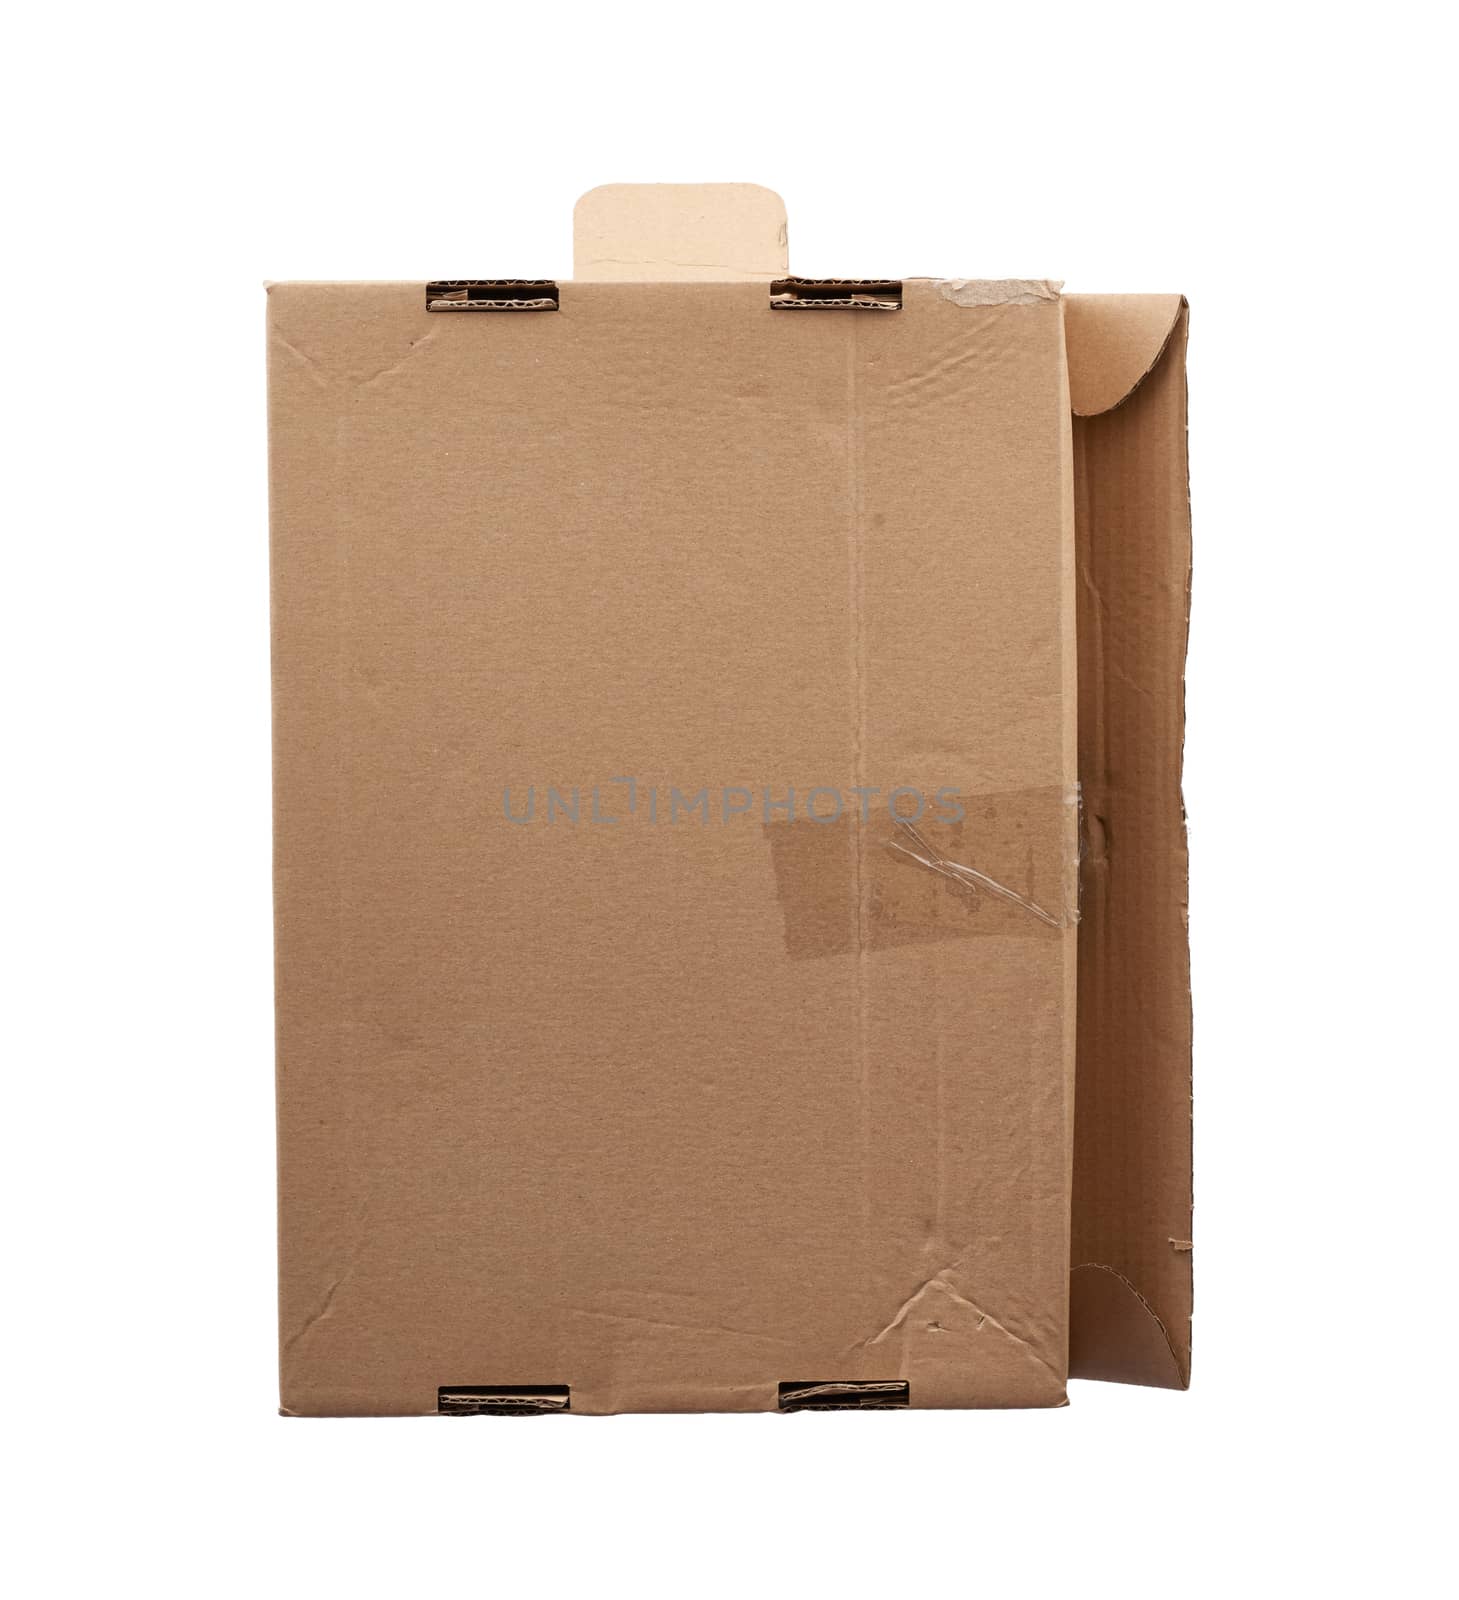 closed brown rectangular cardboard box for transporting goods is by ndanko